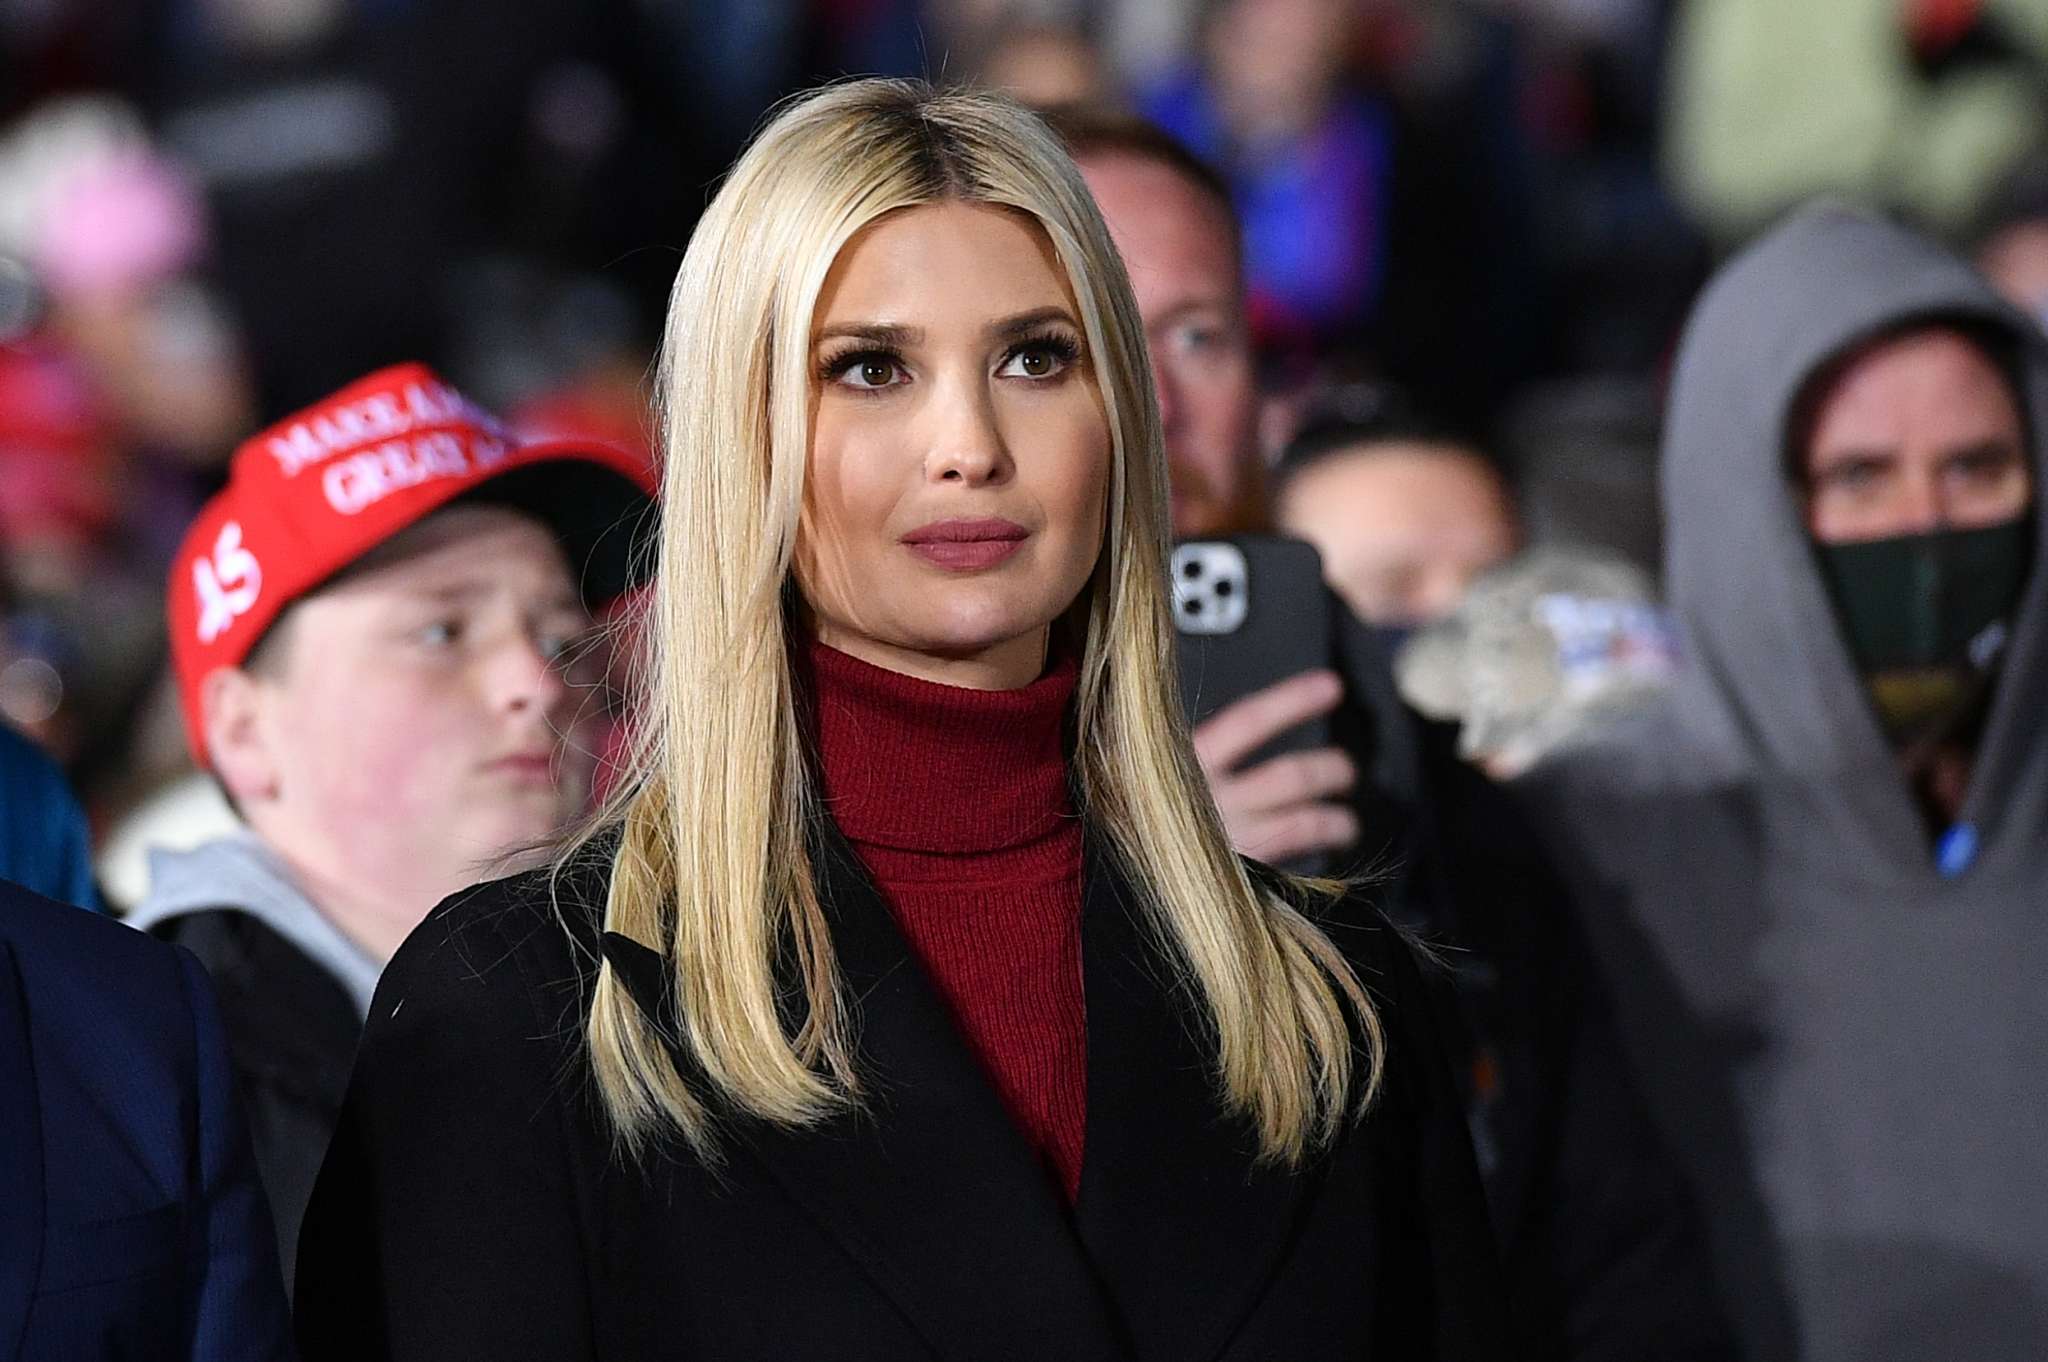 daddy-and-daughter-divide-ivanka-and-donald-trump-have-fallen-out